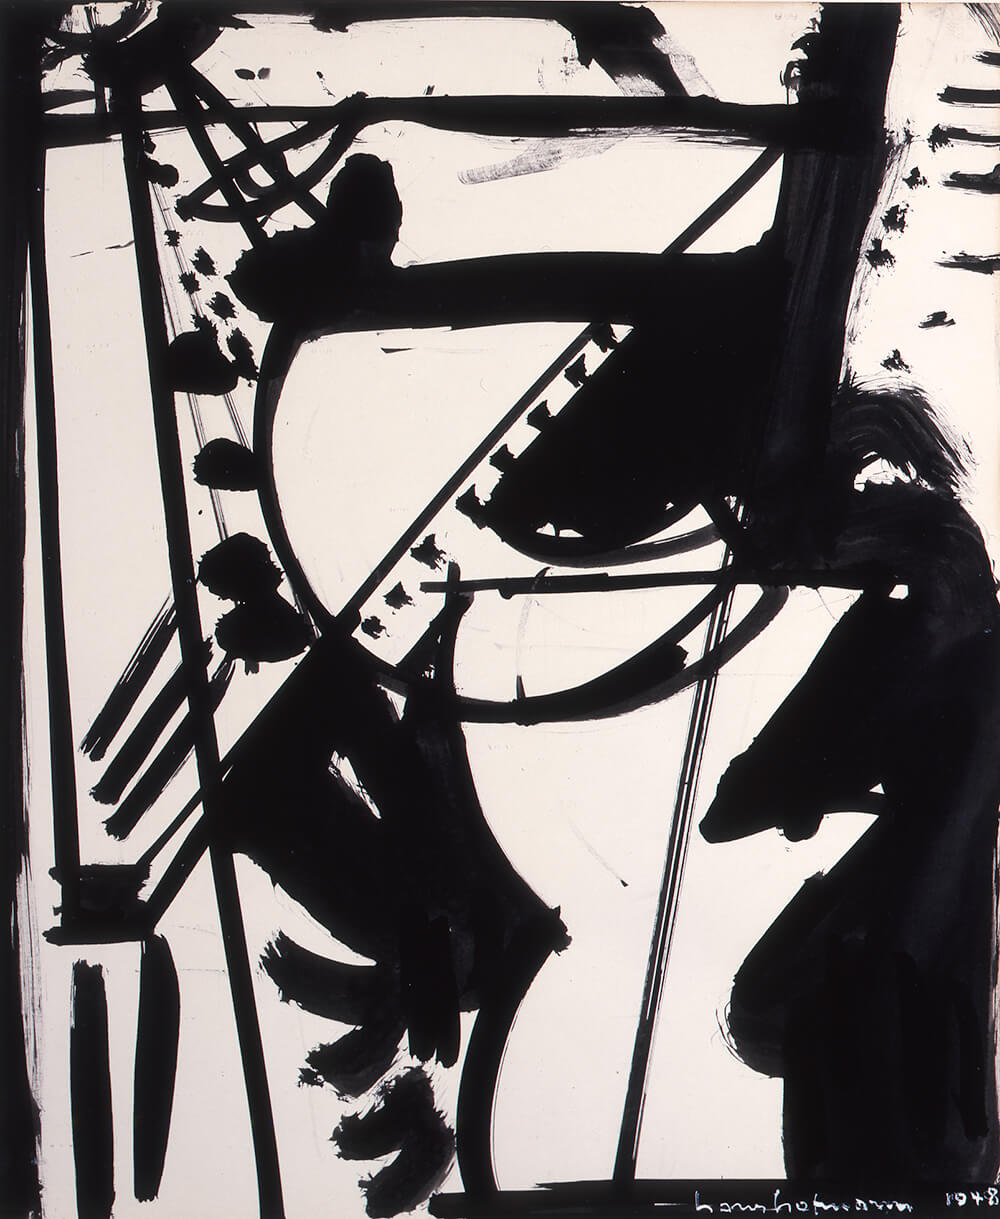 Hans Hofmann, Untitled (Sin título), 1948, India ink, Gift of Mr. and Mrs. Orme Lewis. © Artists Rights Society (ARS), New York.